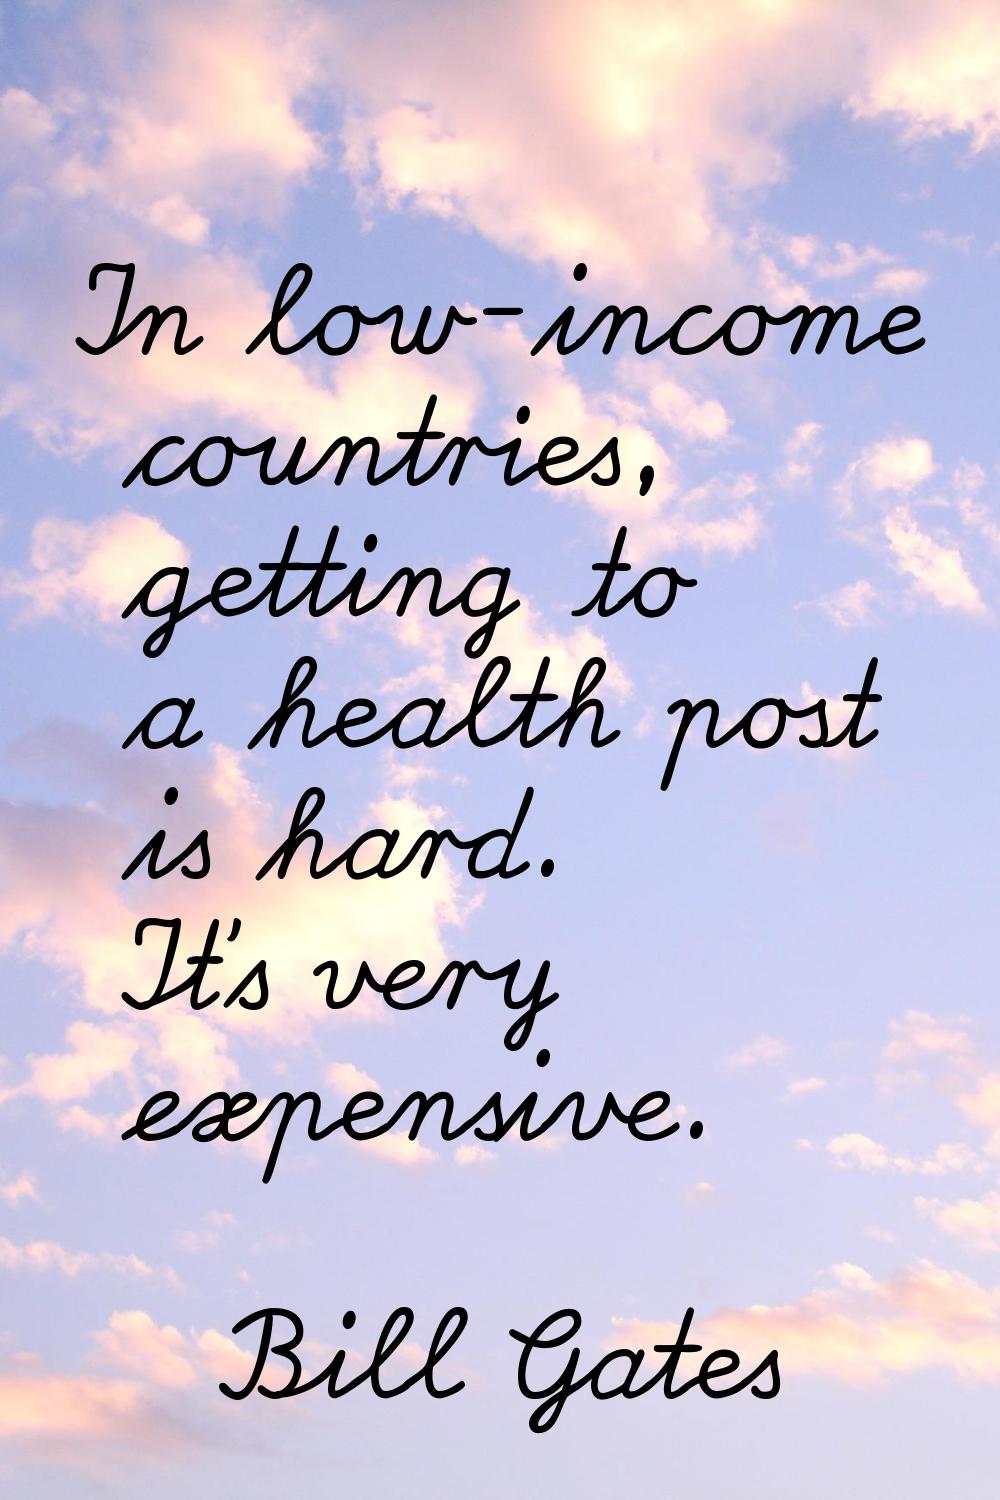 In low-income countries, getting to a health post is hard. It's very expensive.